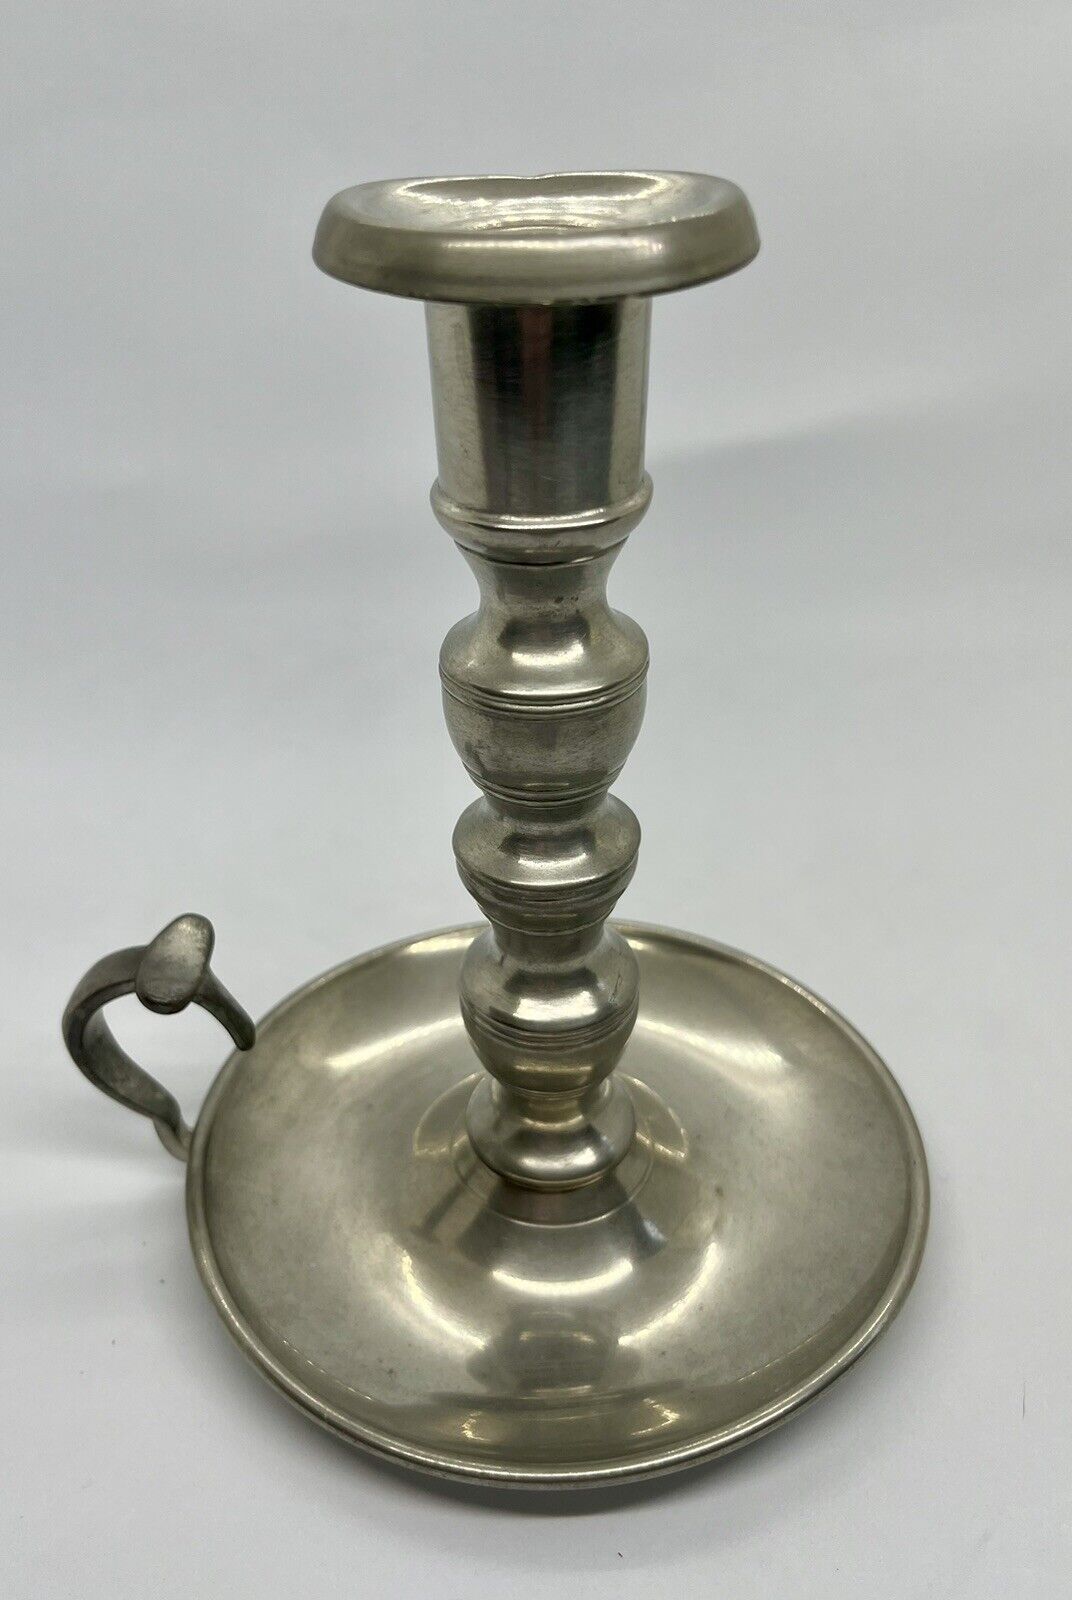 WOODBURY PEWTERERS Henry Ford Museum Pewter Candlestick Chamberstick F32 VINT NE